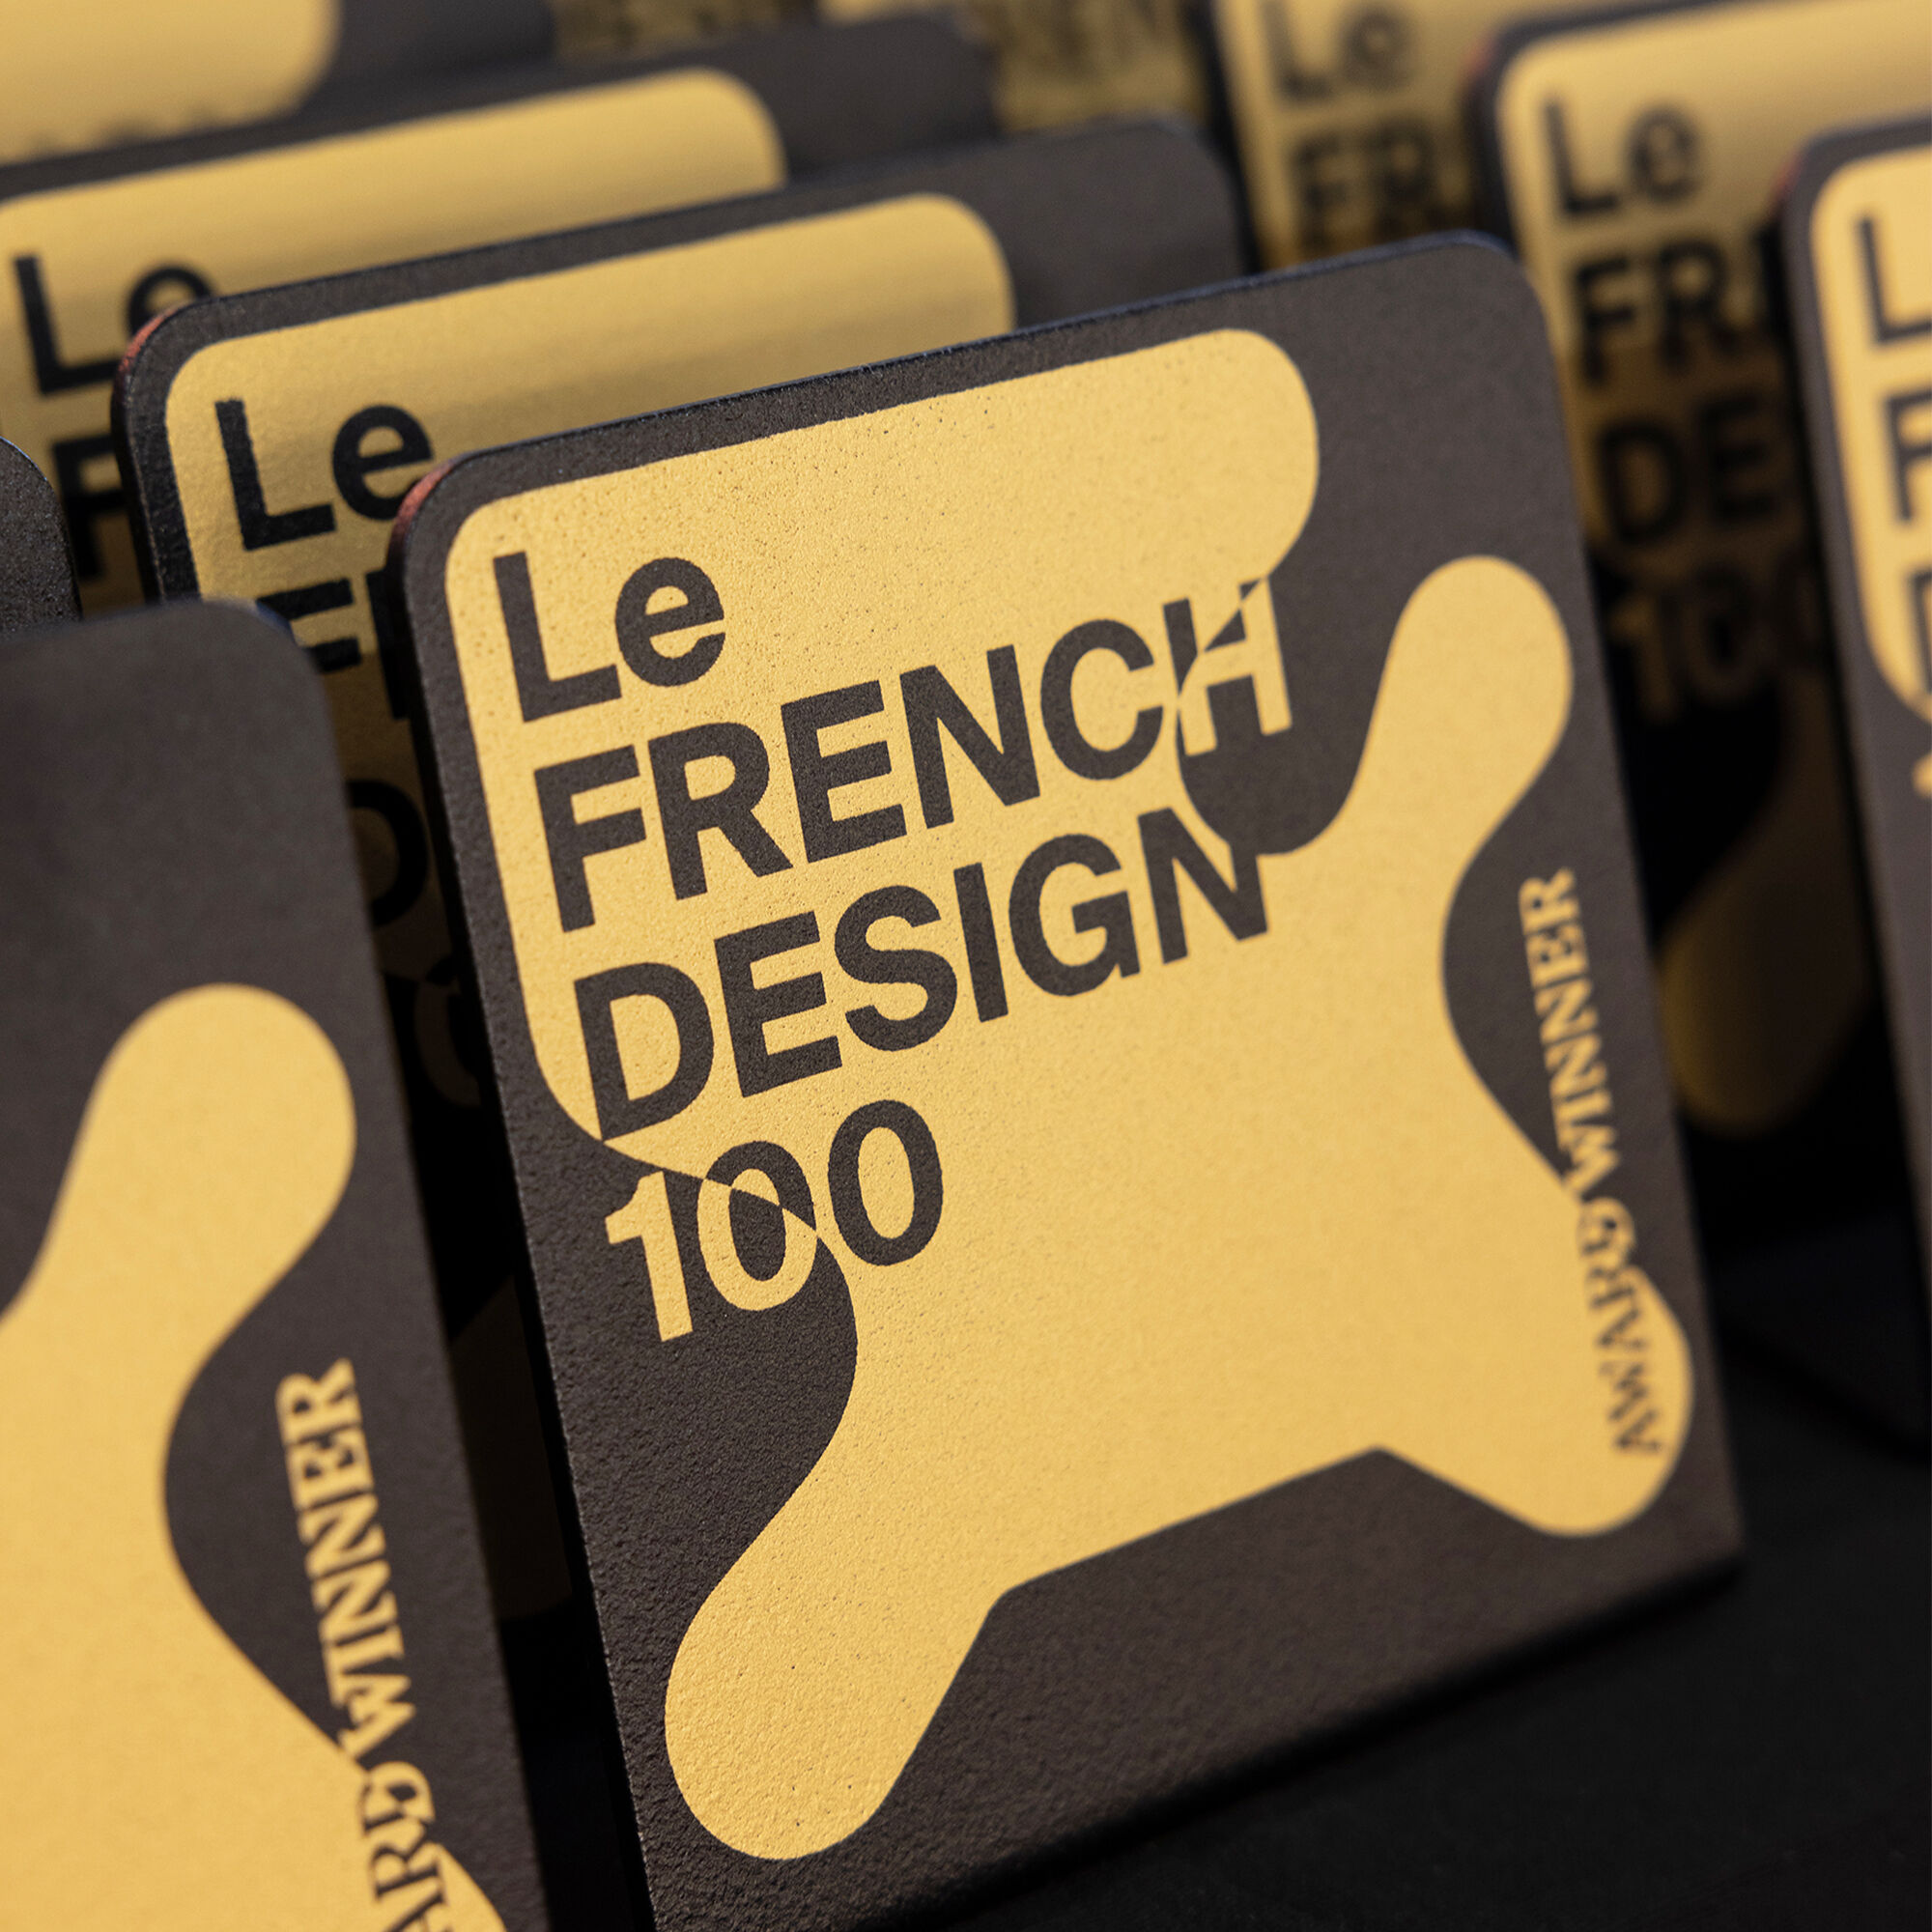 The French Design 100 award